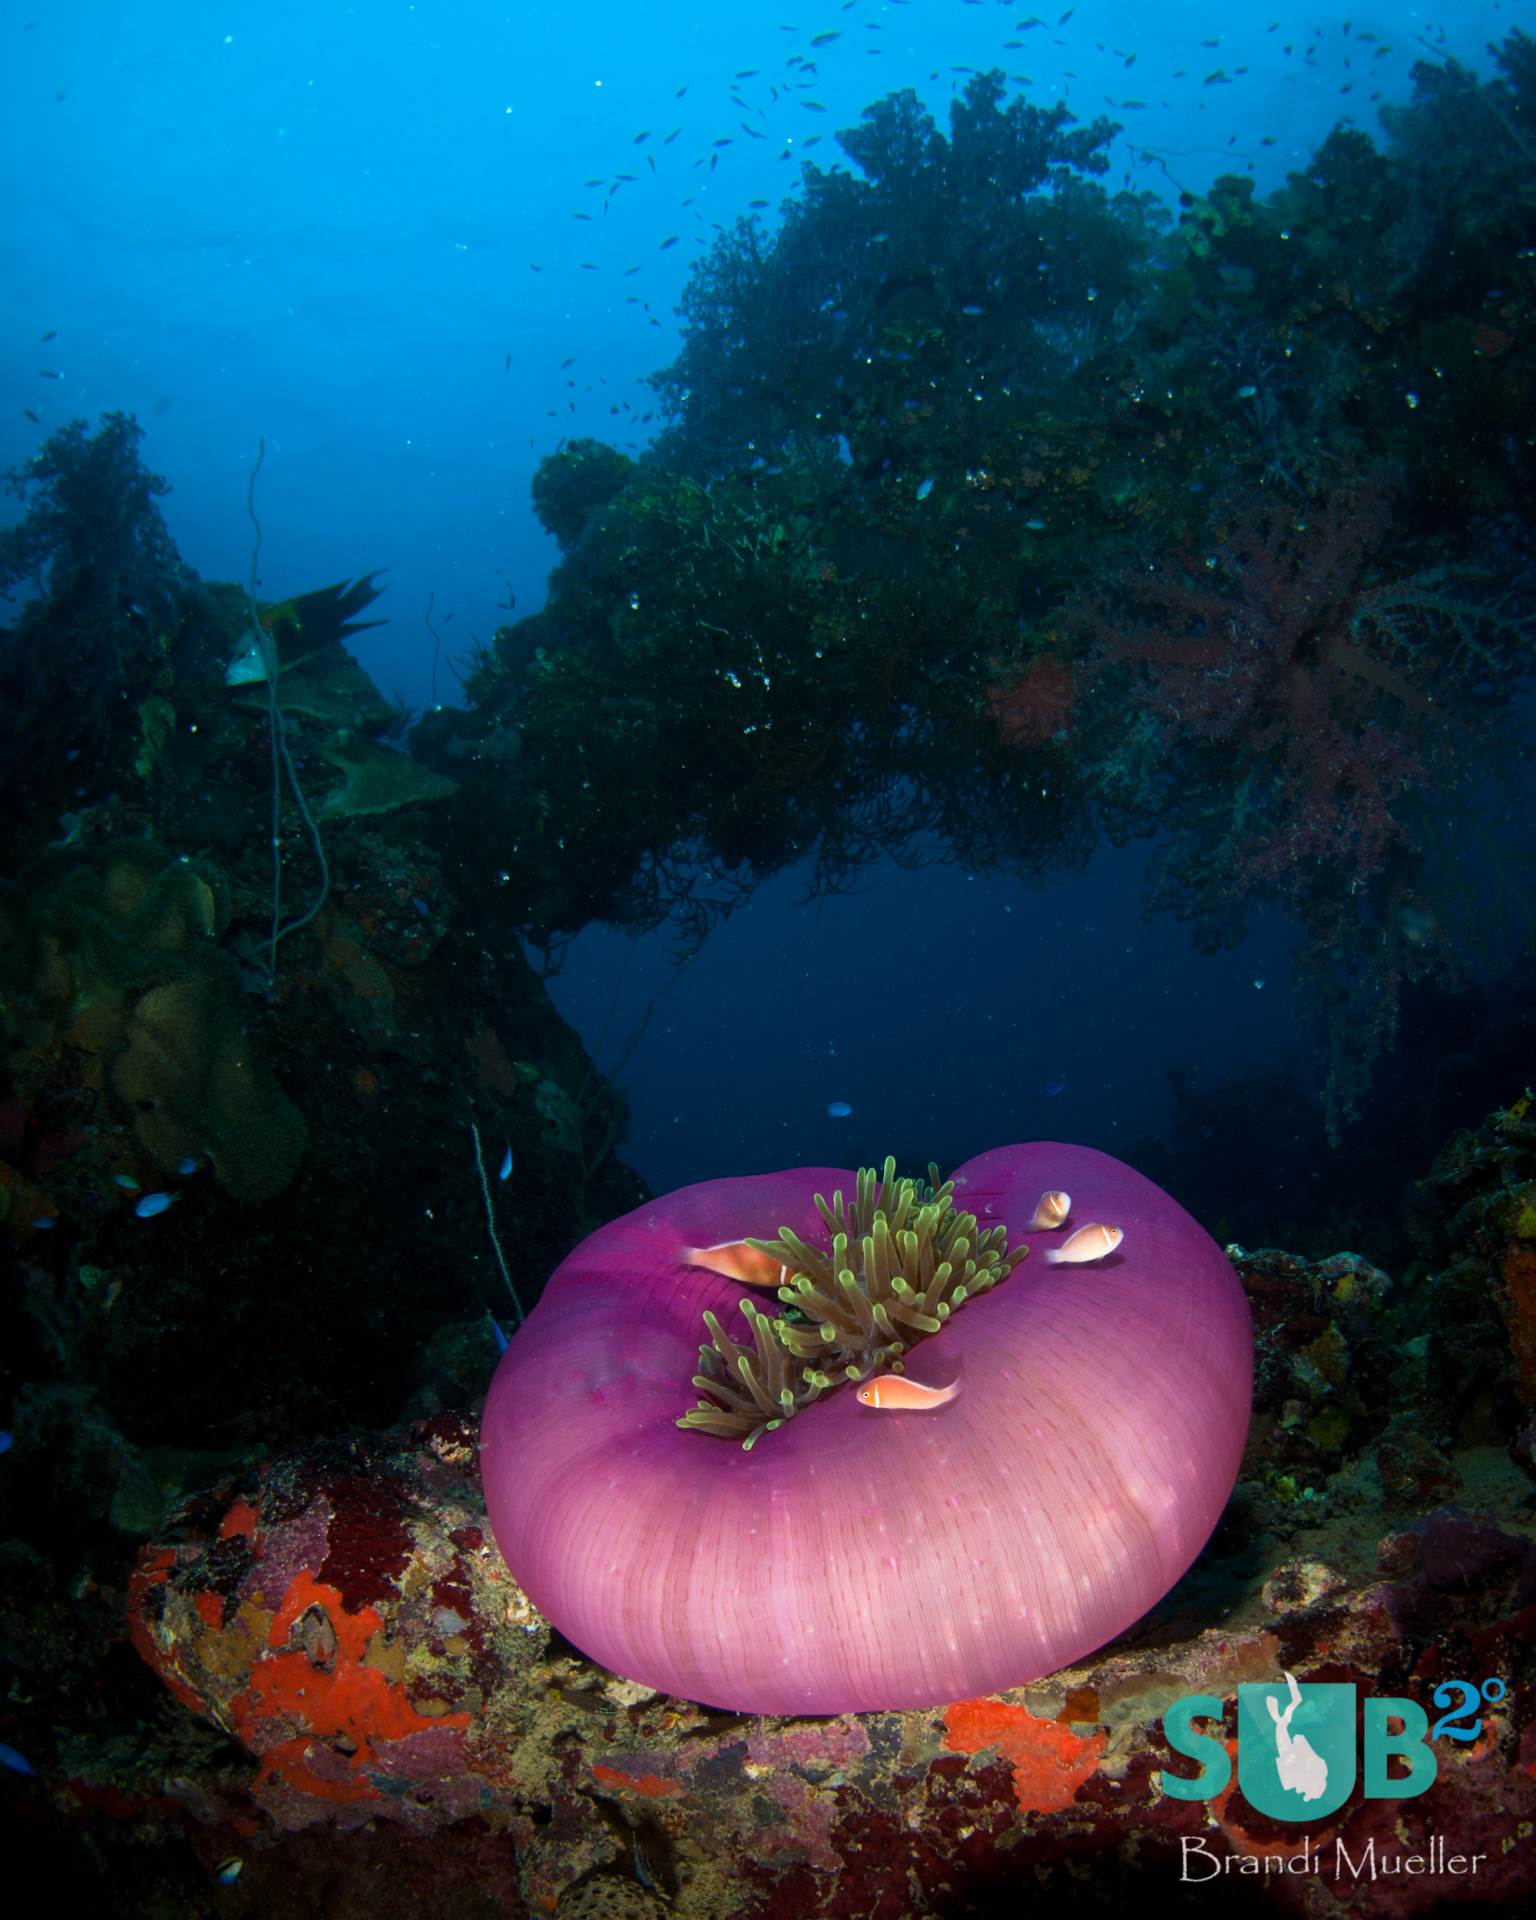 An anemone living on the deck of the Shinkoku Maru, a sunken ship that was part of the Imperial Japanese Navy during WWII.